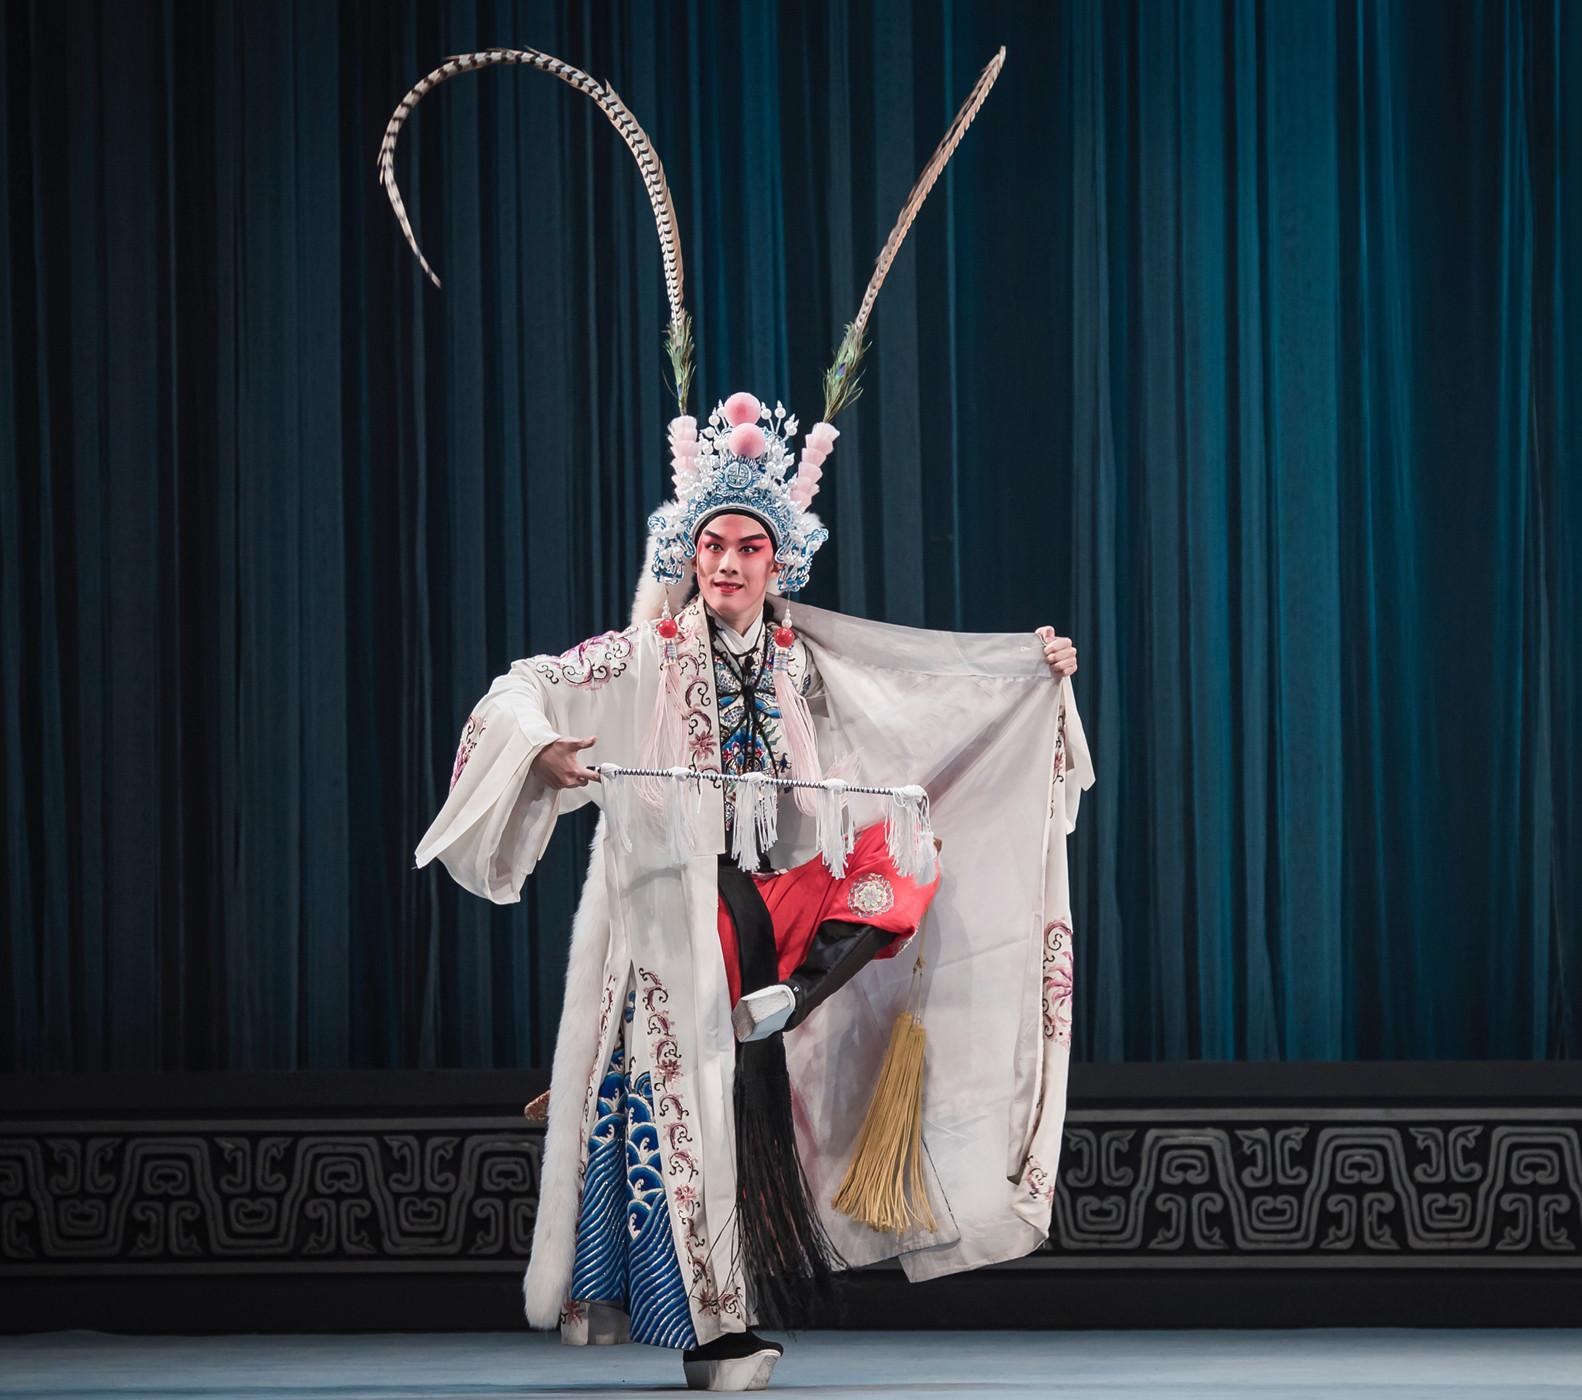 The Leisure and Cultural Services Department has invited the Zhejiang Wu Opera Research Centre to return to Hong Kong for three stunning performances in late July at this year's Chinese Opera Festival. Photo shows a scene from Excerpt "The Eight Mallets".